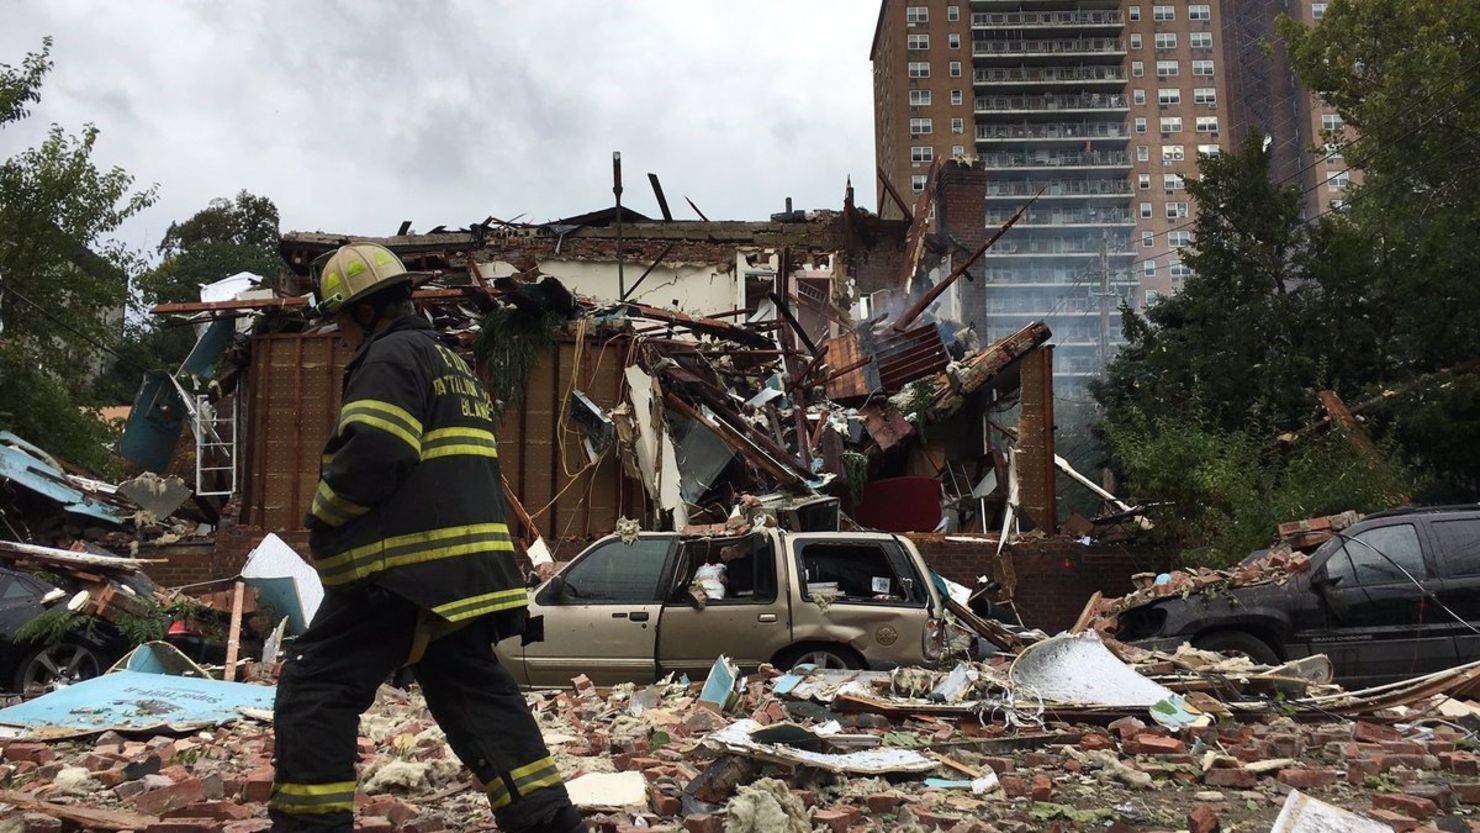 A firefighter at the scene of a Bronx building explosion that killed a battalion chief and injured 20.